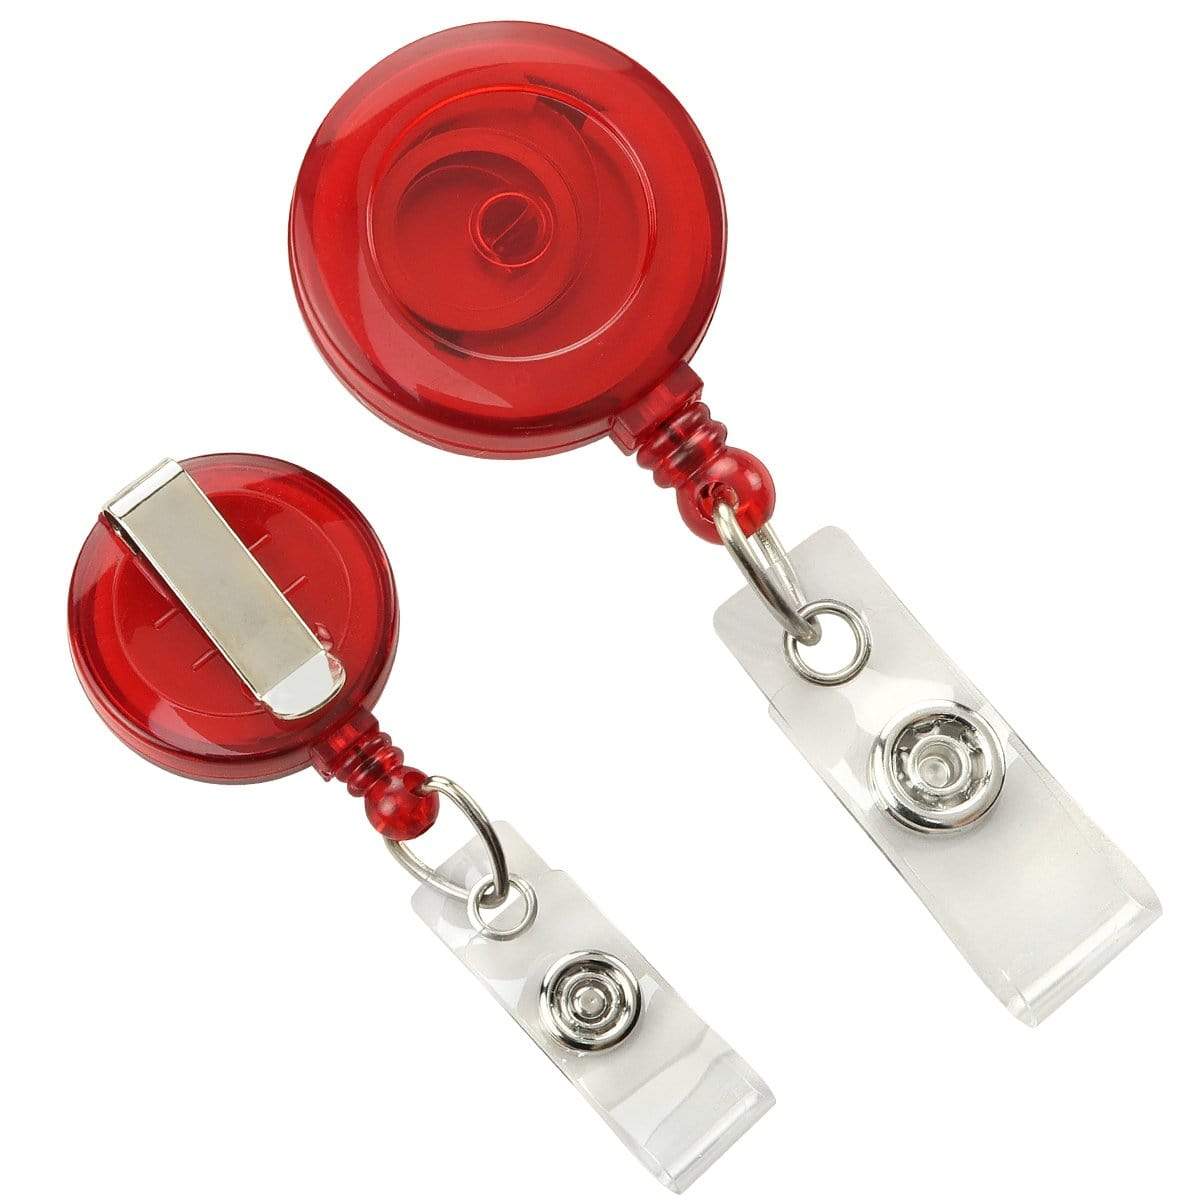 Clear Badge Reel With Belt Clip and Retractable Cord (2120-3600) and More  Translucent Badge Reels at